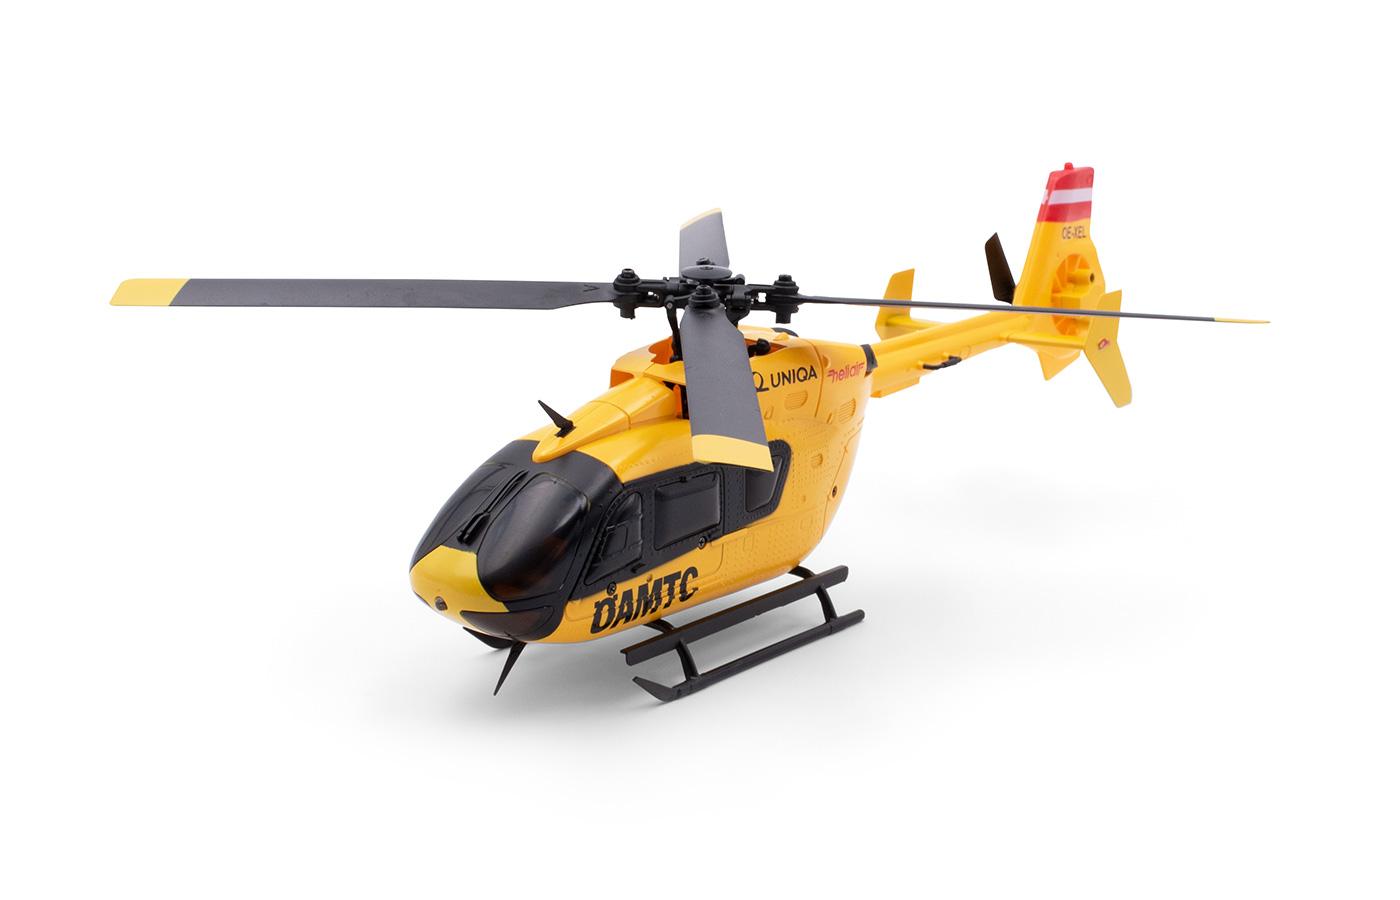 Ec 135 Rc Helicopter: Key Features and Specifications